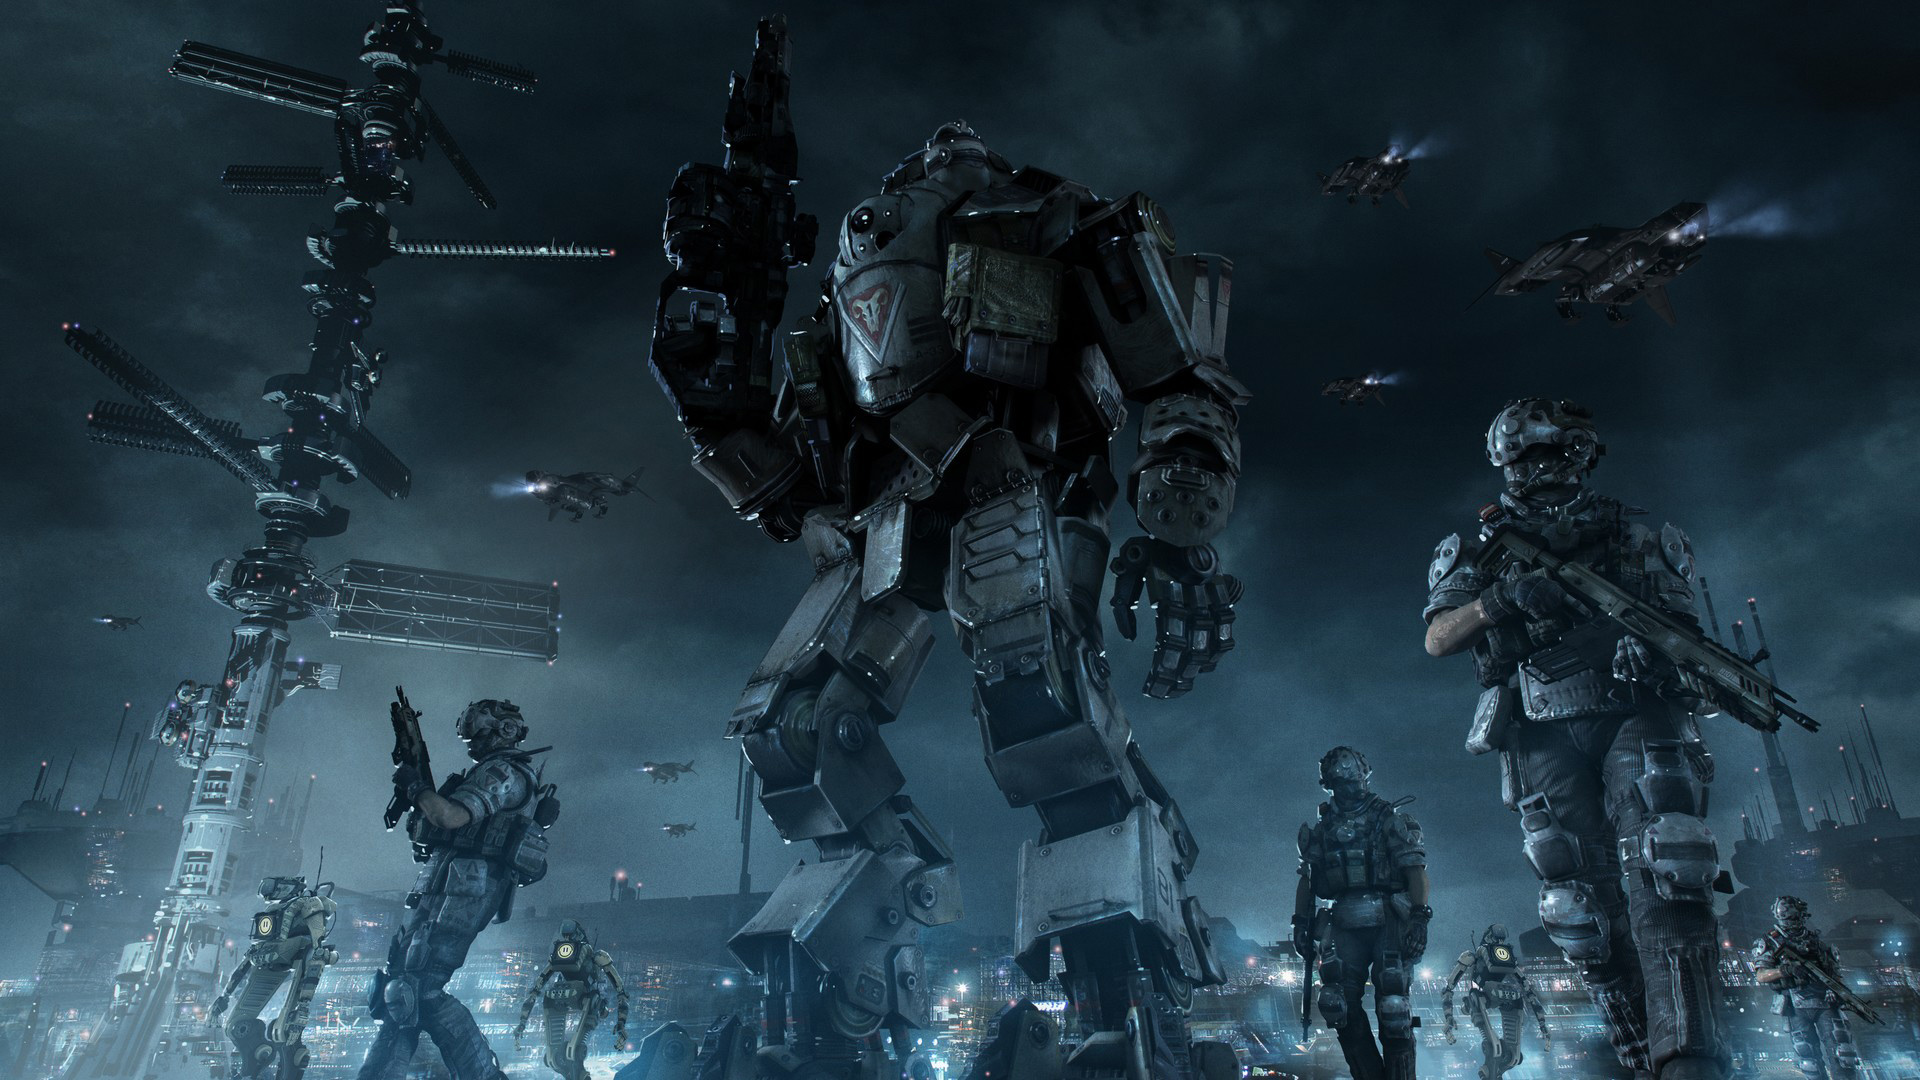 General 1920x1080 Titanfall video games mechs futuristic digital art science fiction video game art soldier weapon